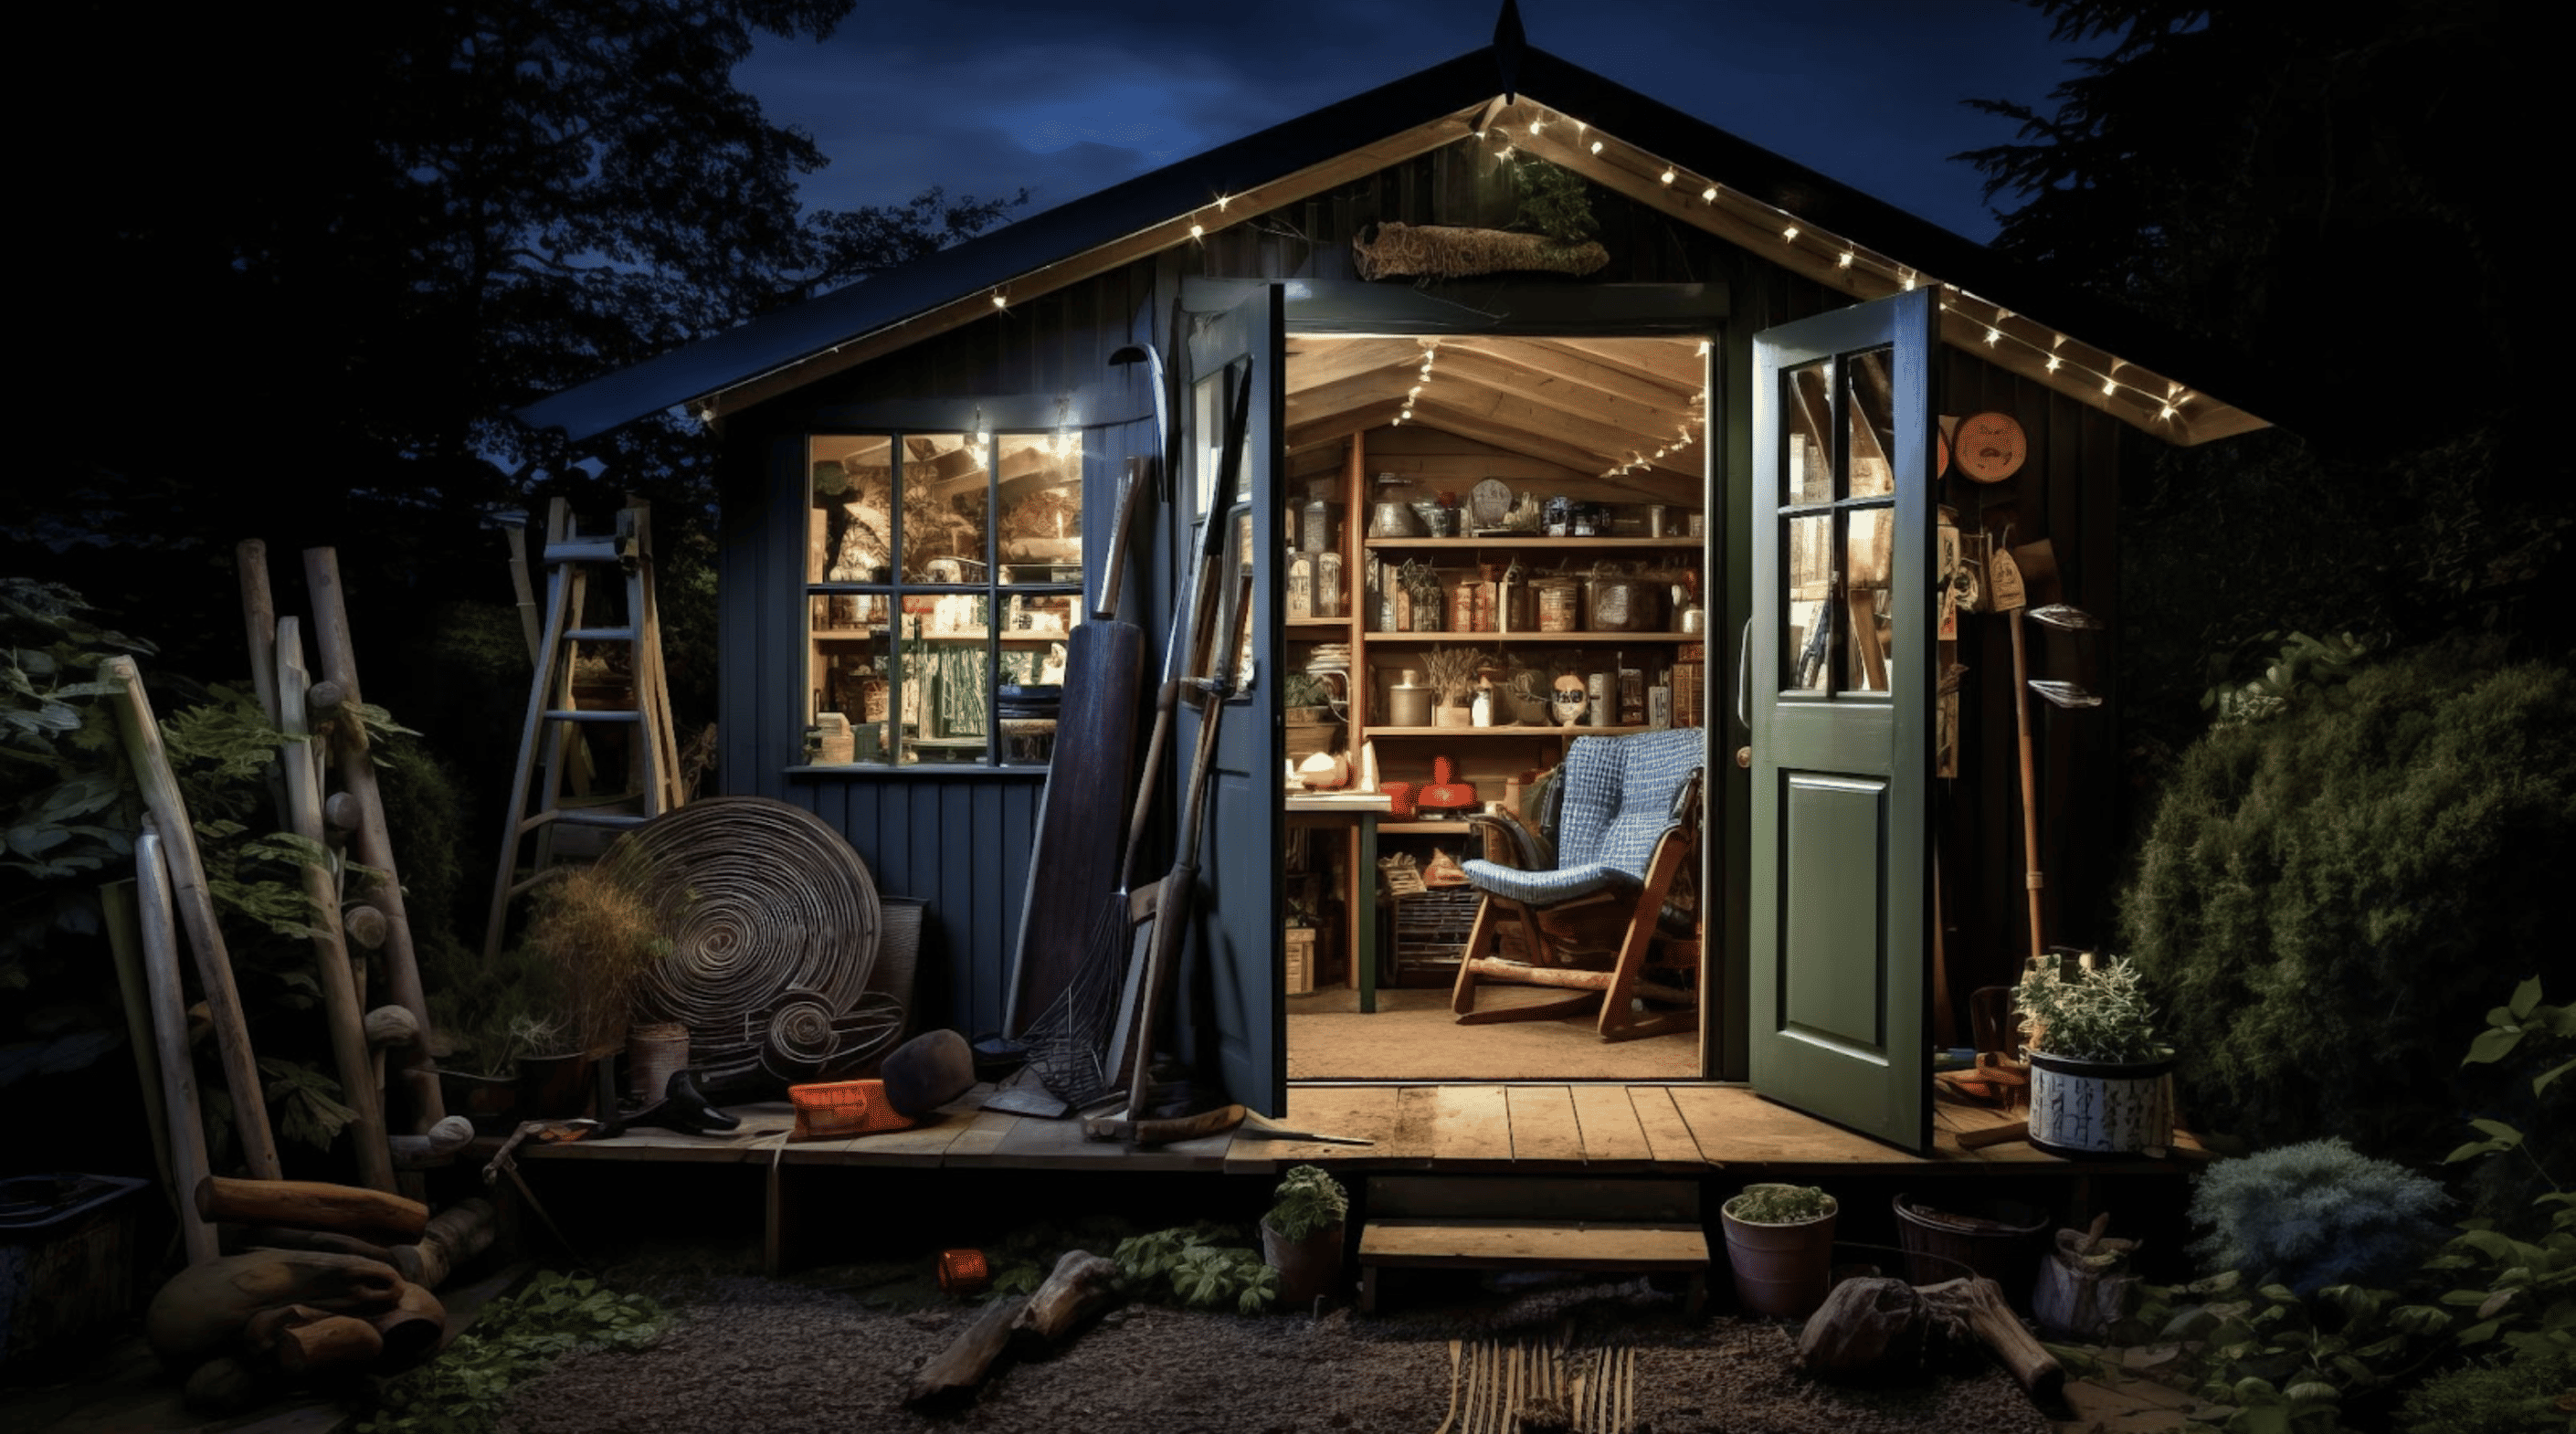 garden shed filled with tools